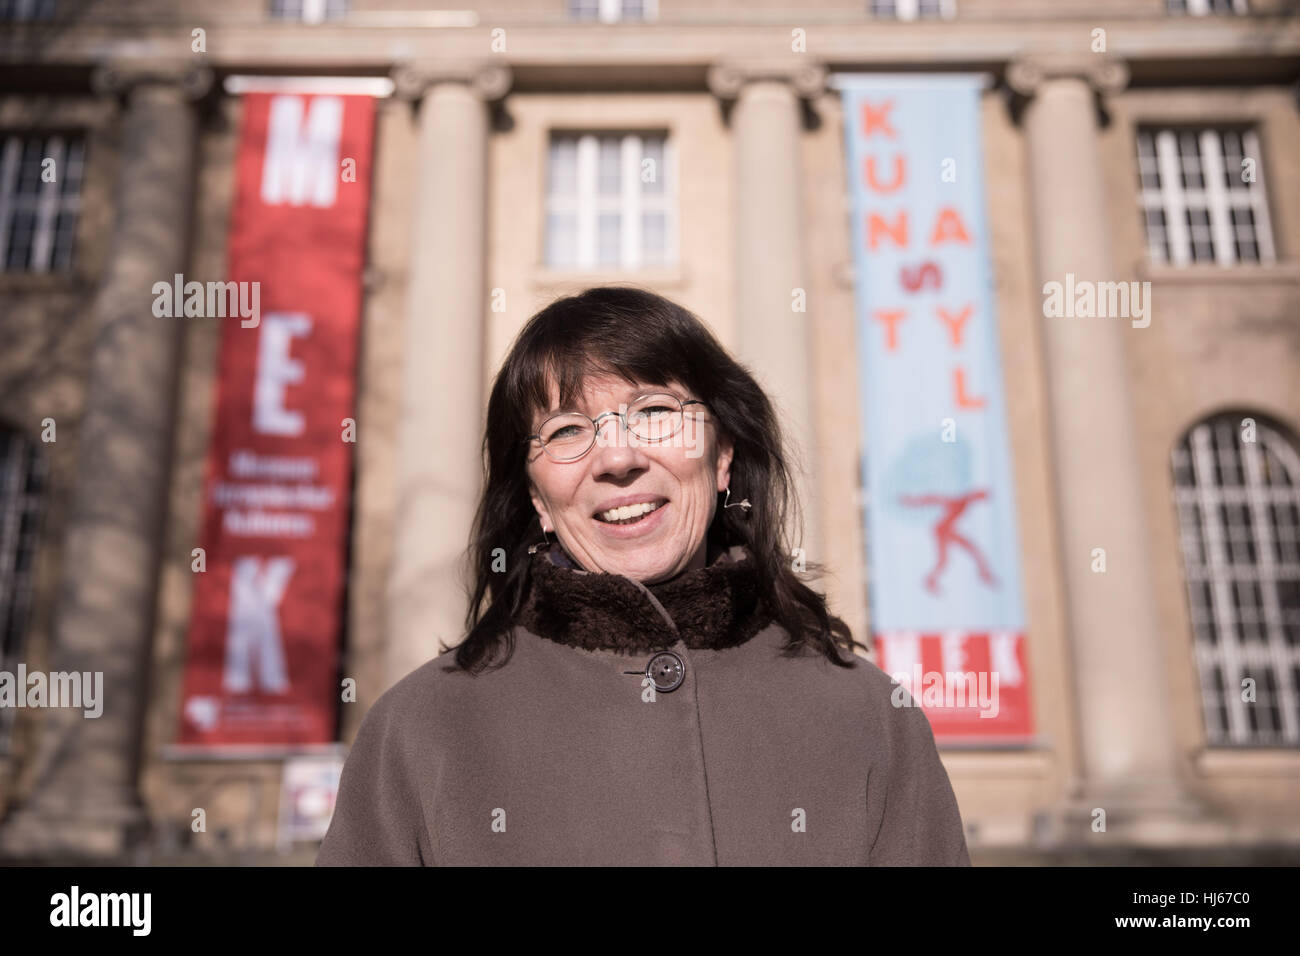 Berlin, Germany. 26th Jan, 2017. Elisabeth Tietmeyer, Director of the Museum of European Cultures (MEK), stands outside the entrance to the museum in Berlin, Germany, 26 January 2017. The museum received a new appearance. Photo: Jörg Carstensen/dpa/Alamy Live News Stock Photo